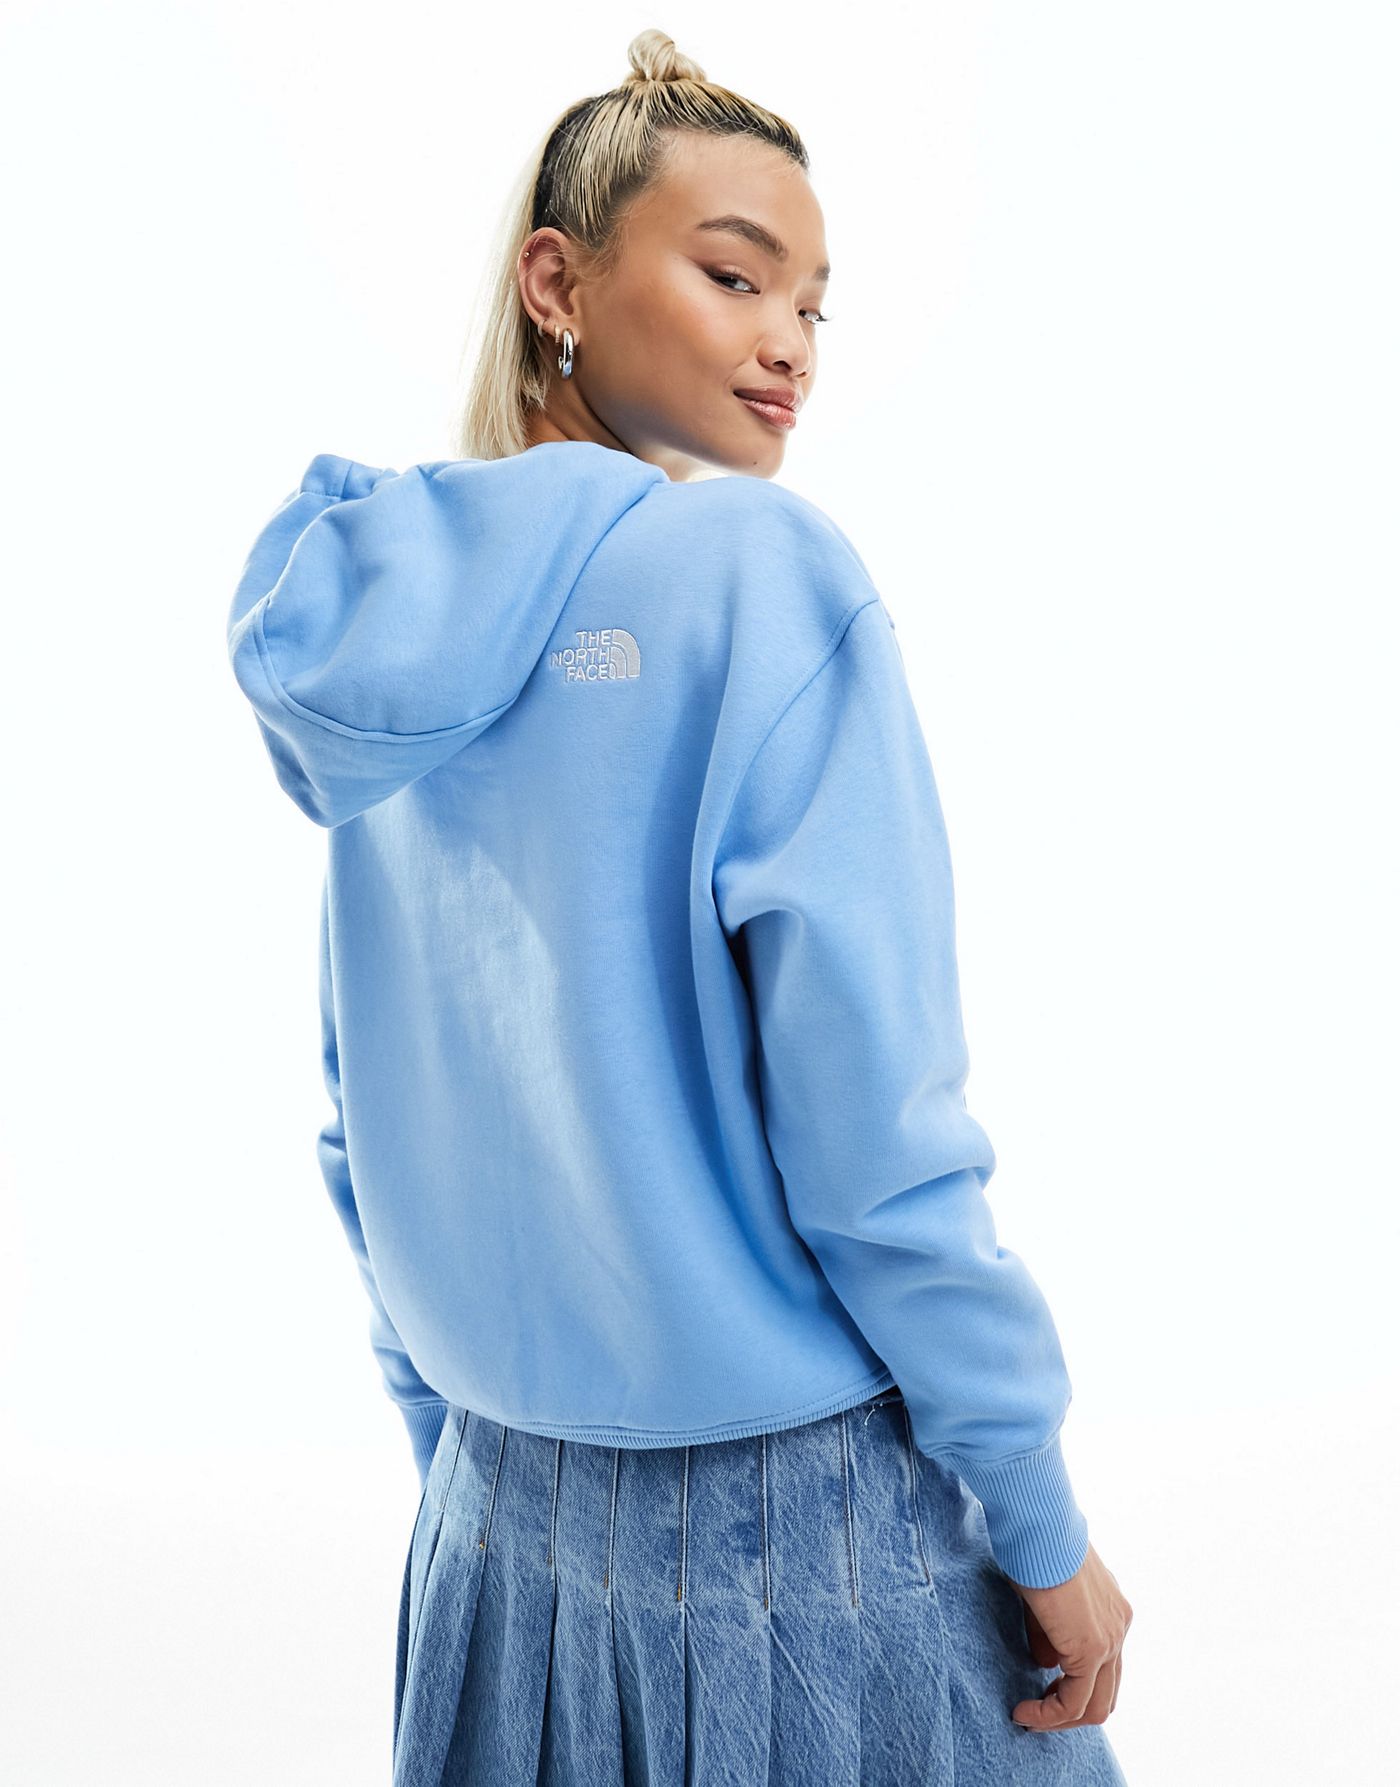 The North Face Essential oversized fleece hoodie in blue Exclusive at ASOS